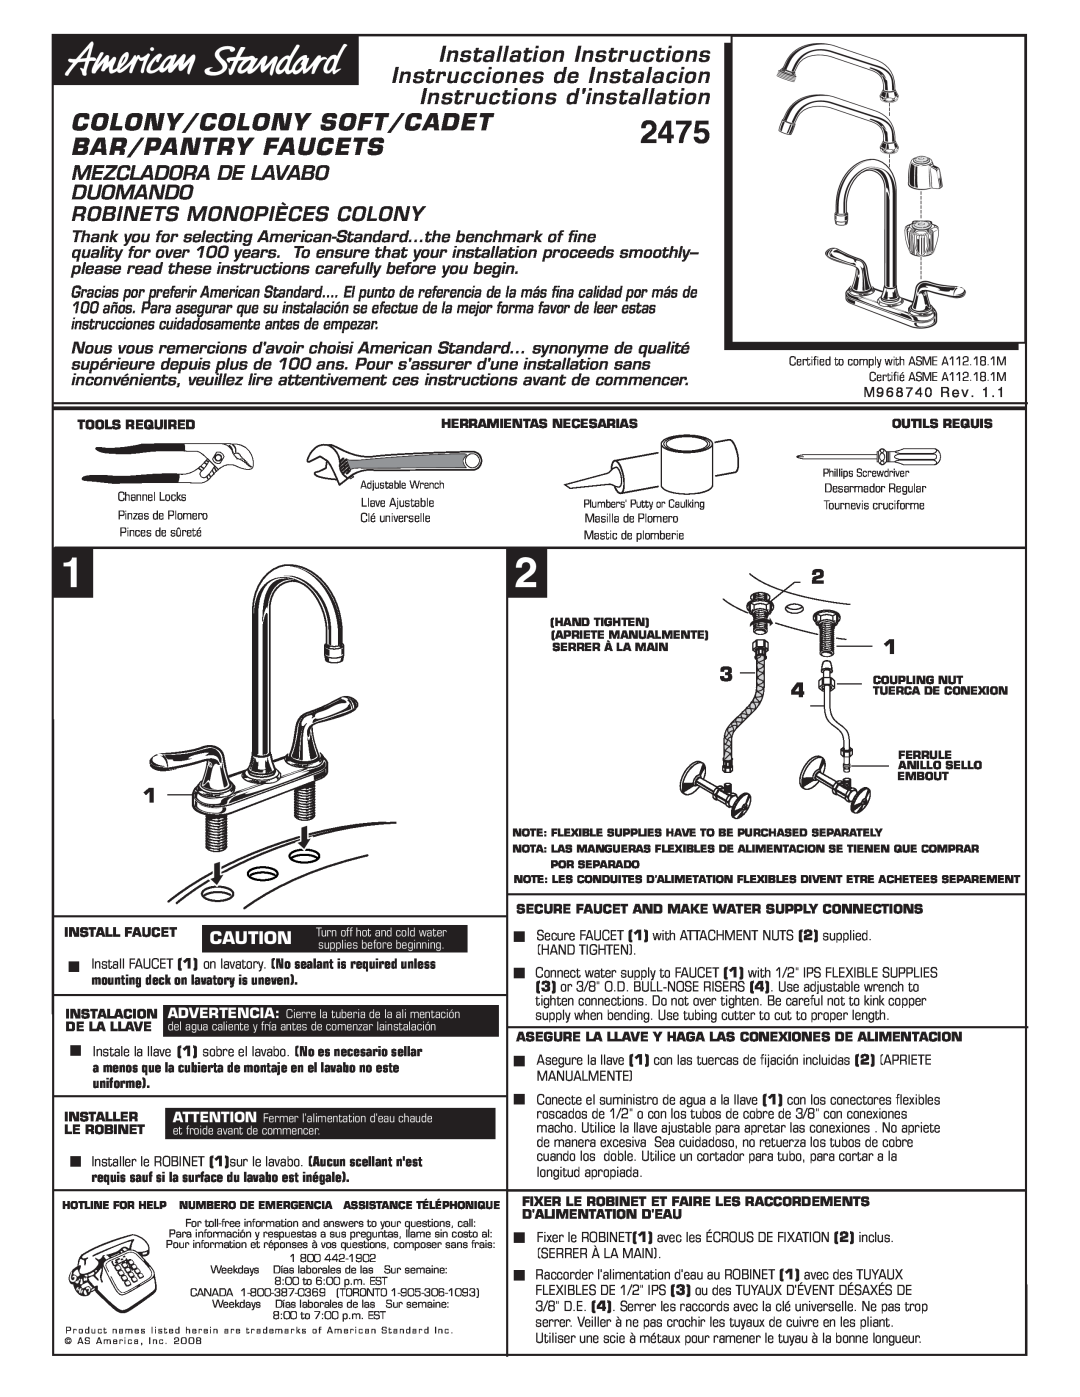 American Standard Colony/Colony Soft/Cadet Bar/Pantry Faucets installation instructions Series, Installation Instructions 